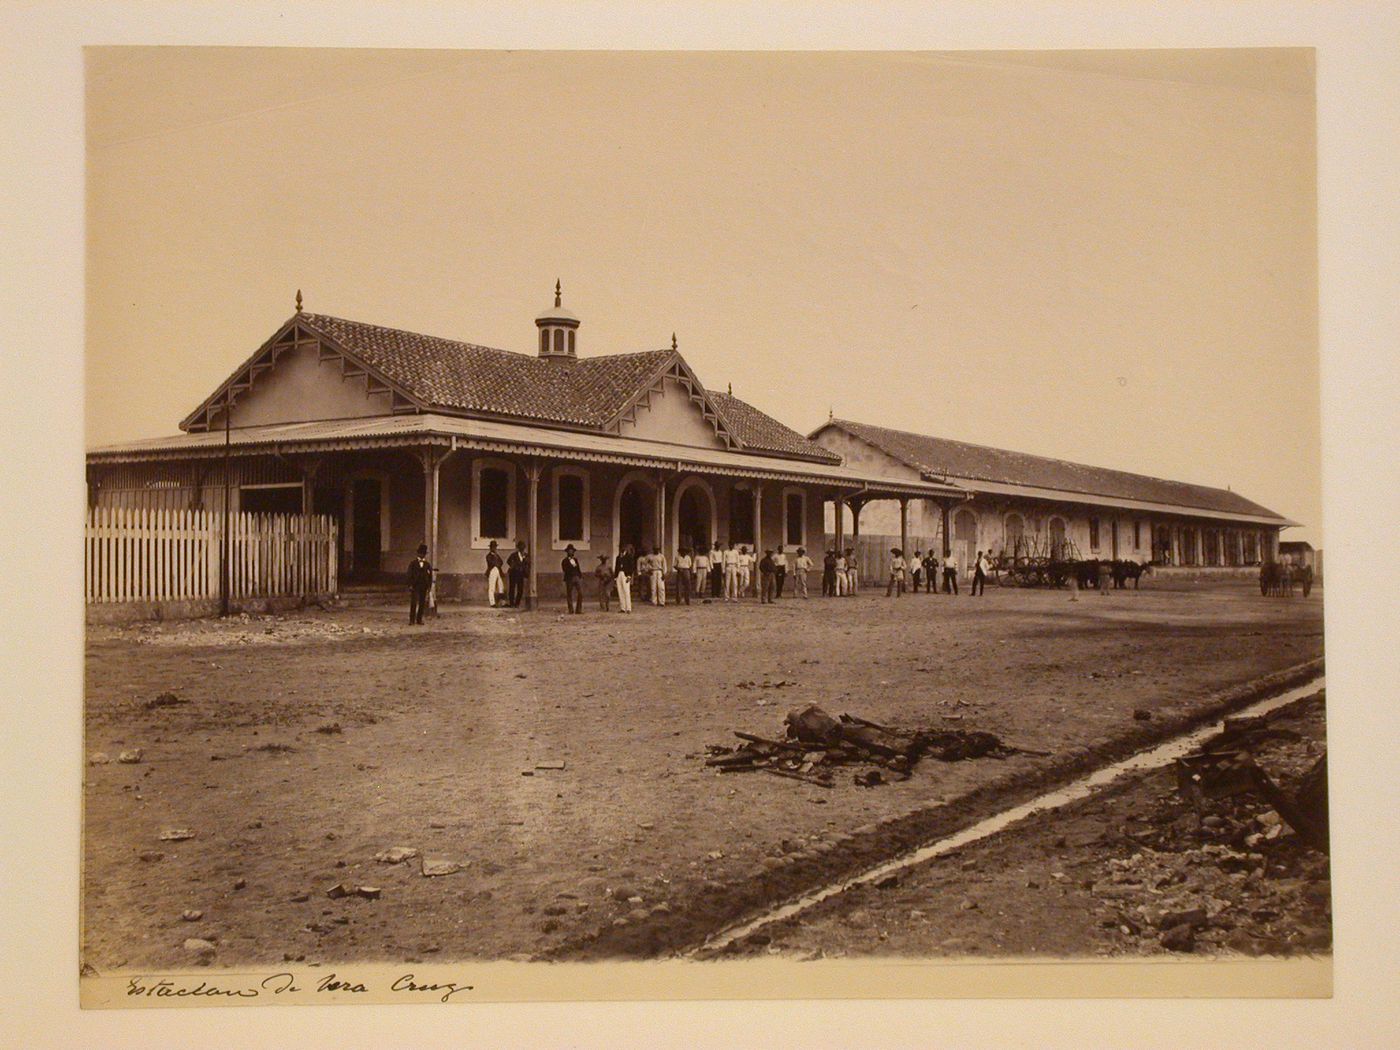 View of the principal façade of the Veracruz railway station with a gutter and rubbish in the foreground and men and horse-drawn vehicles in the background, Mexico